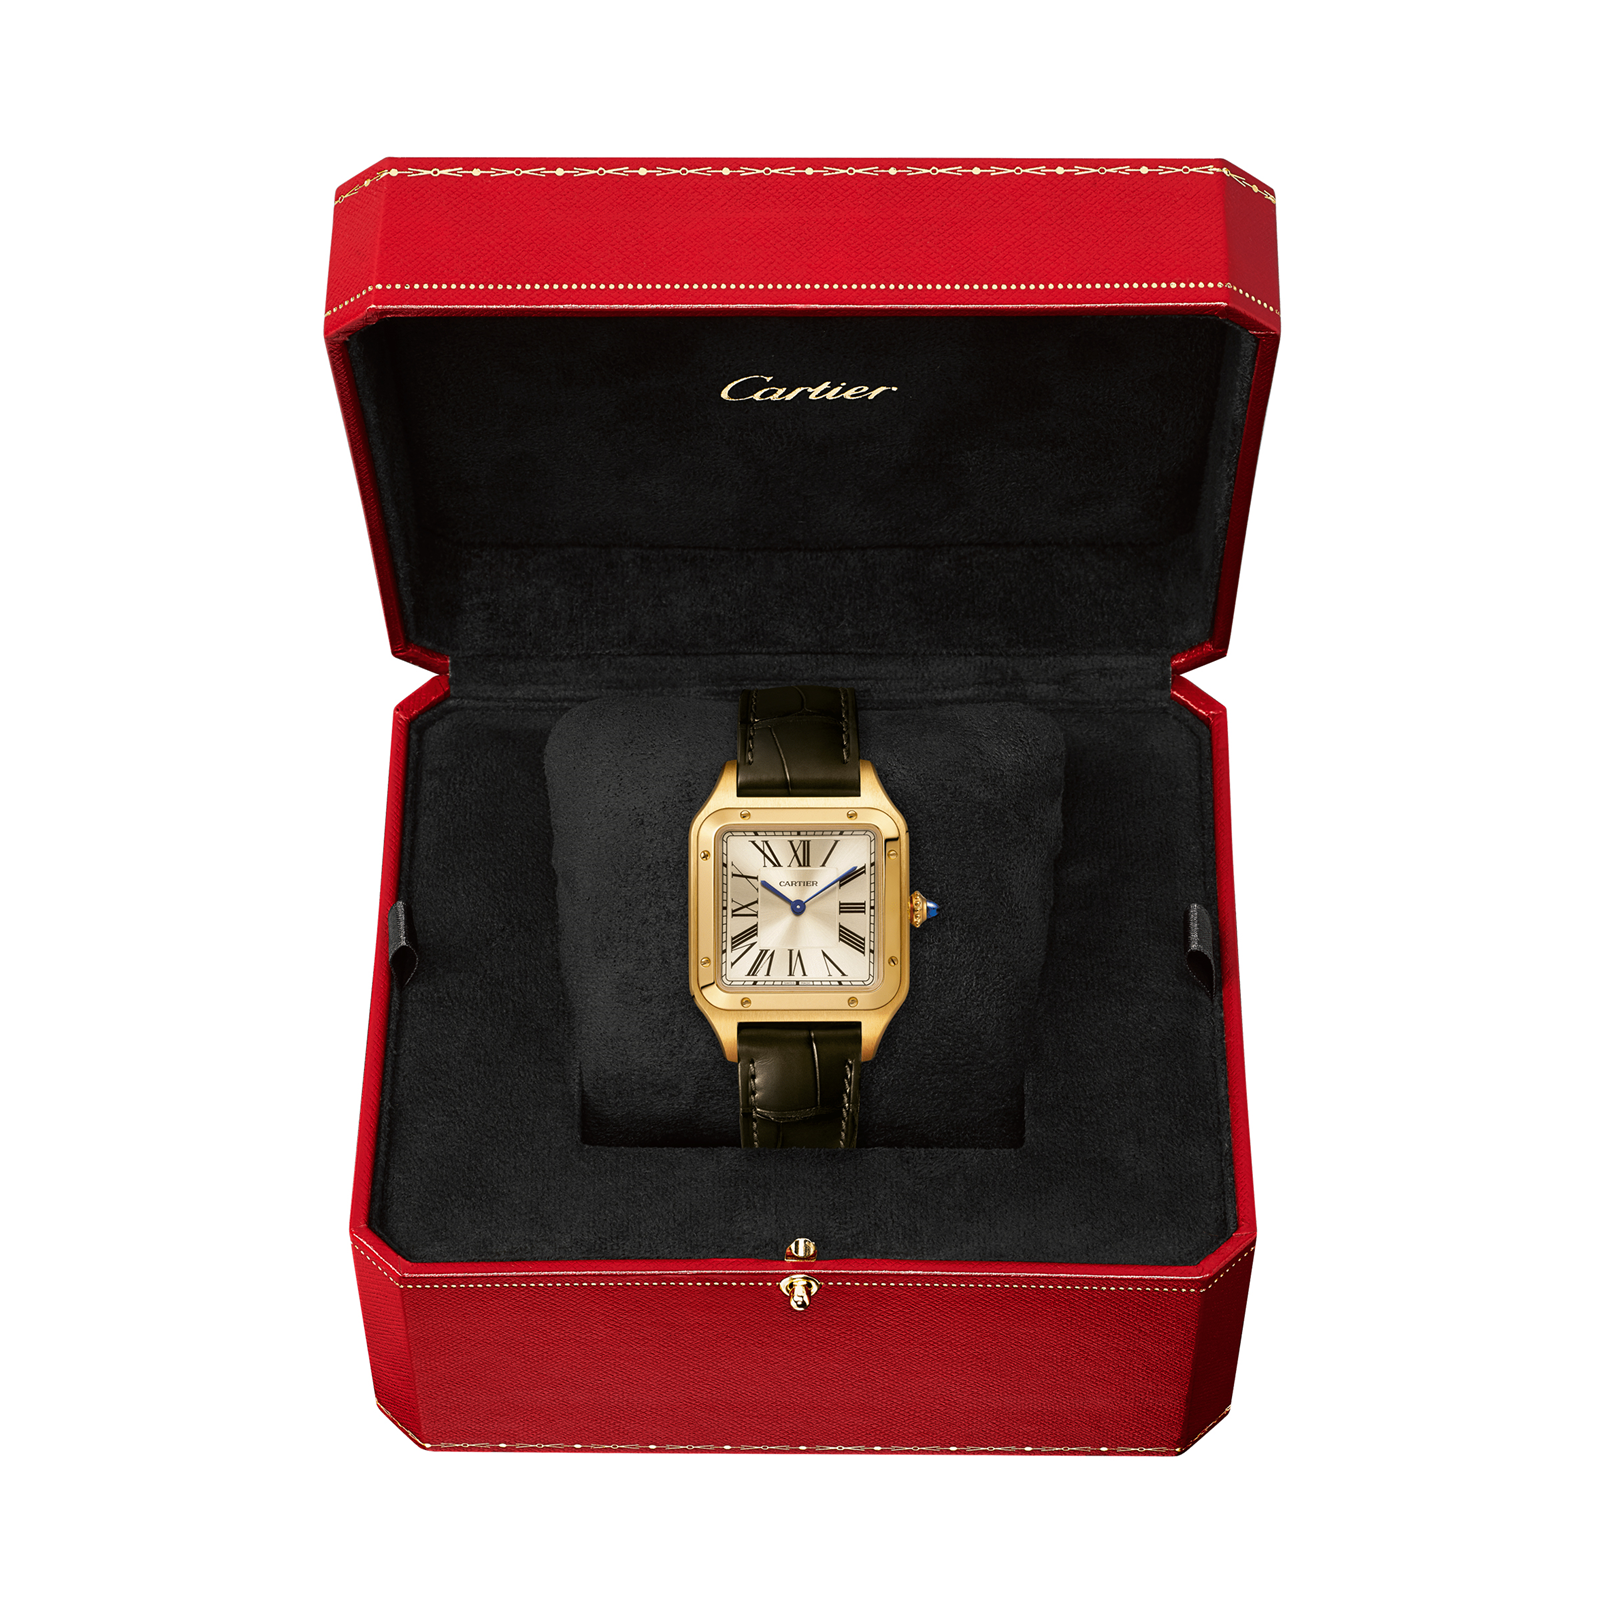 Santos-Dumont watch LIMITED EDITION, Large model, yellow ...